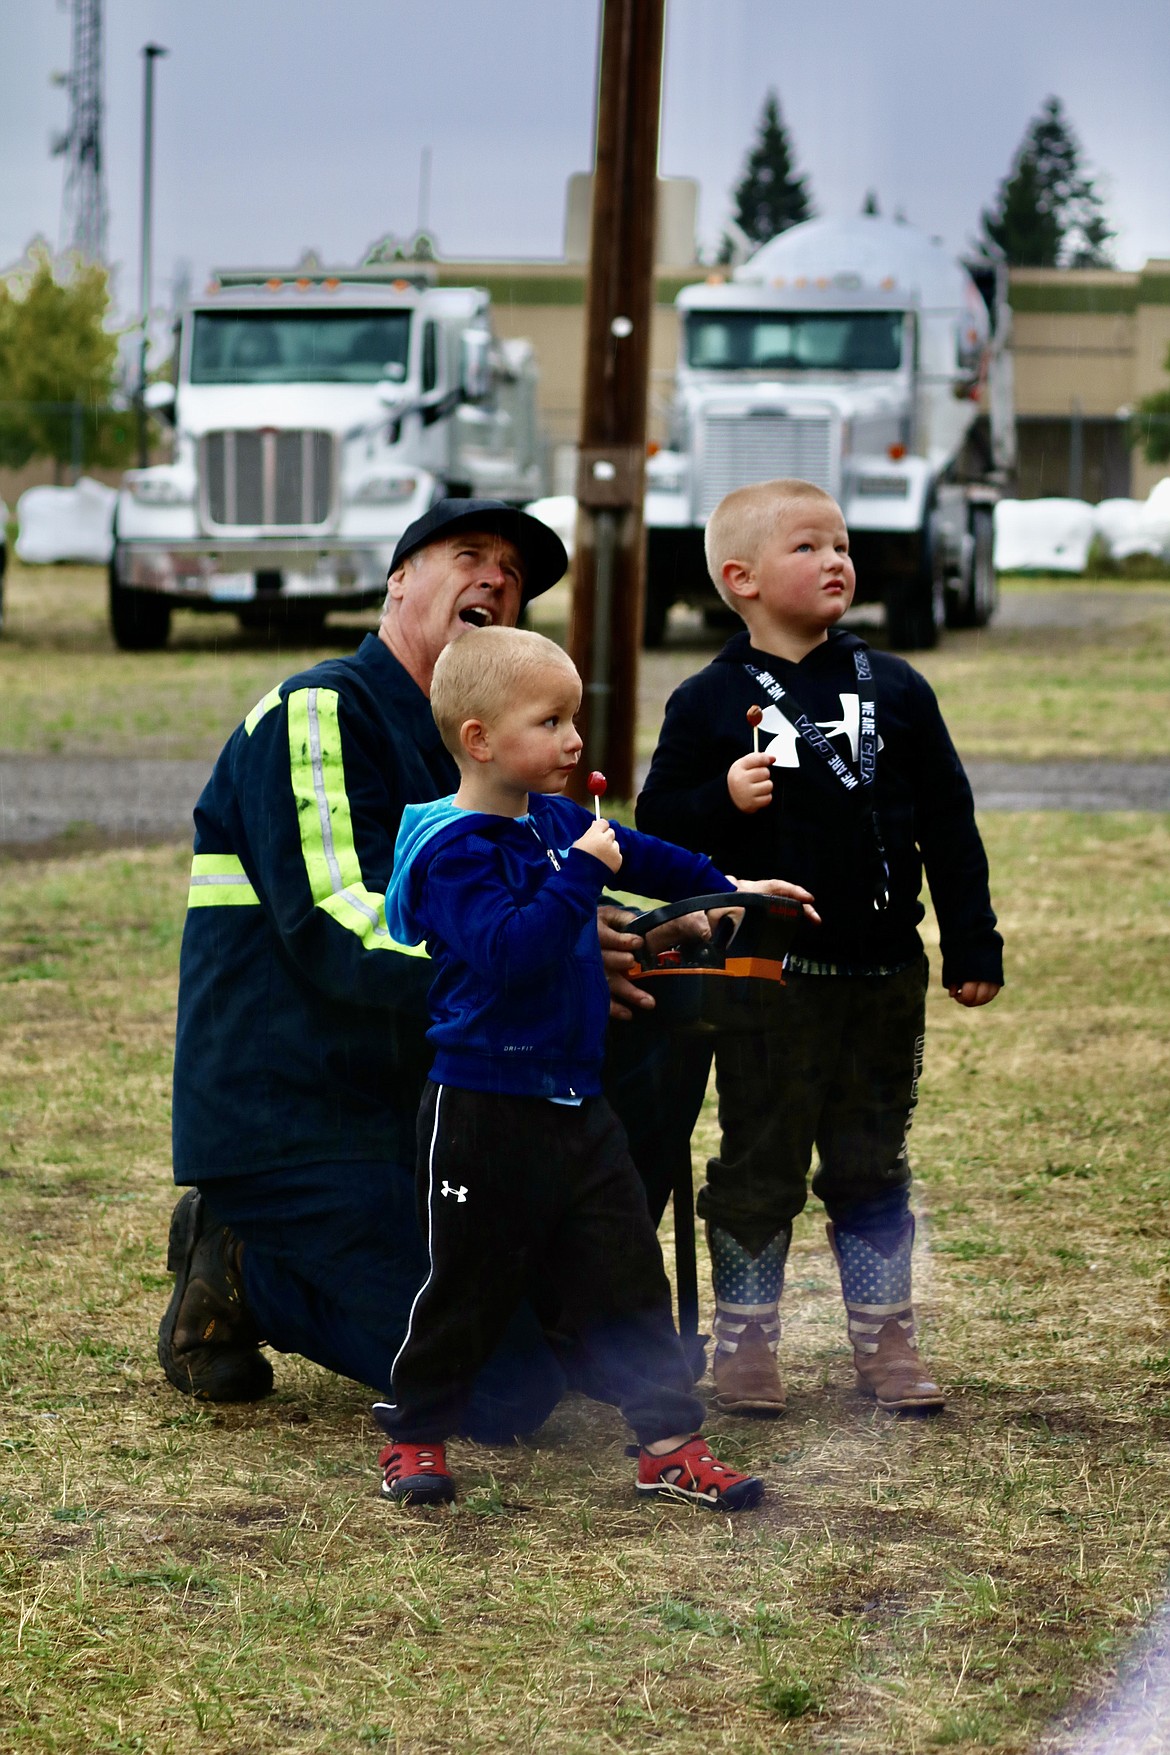 Joe Andrews, an operator for Reliable Towing, shows brothers Kade, 3, left, and Logan Abey, 4, of Post Falls how to operate the crane on the tow truck at Meet the Machines at the Kootenai County Fairgrounds on Saturday morning. HANNAH NEFF/Press